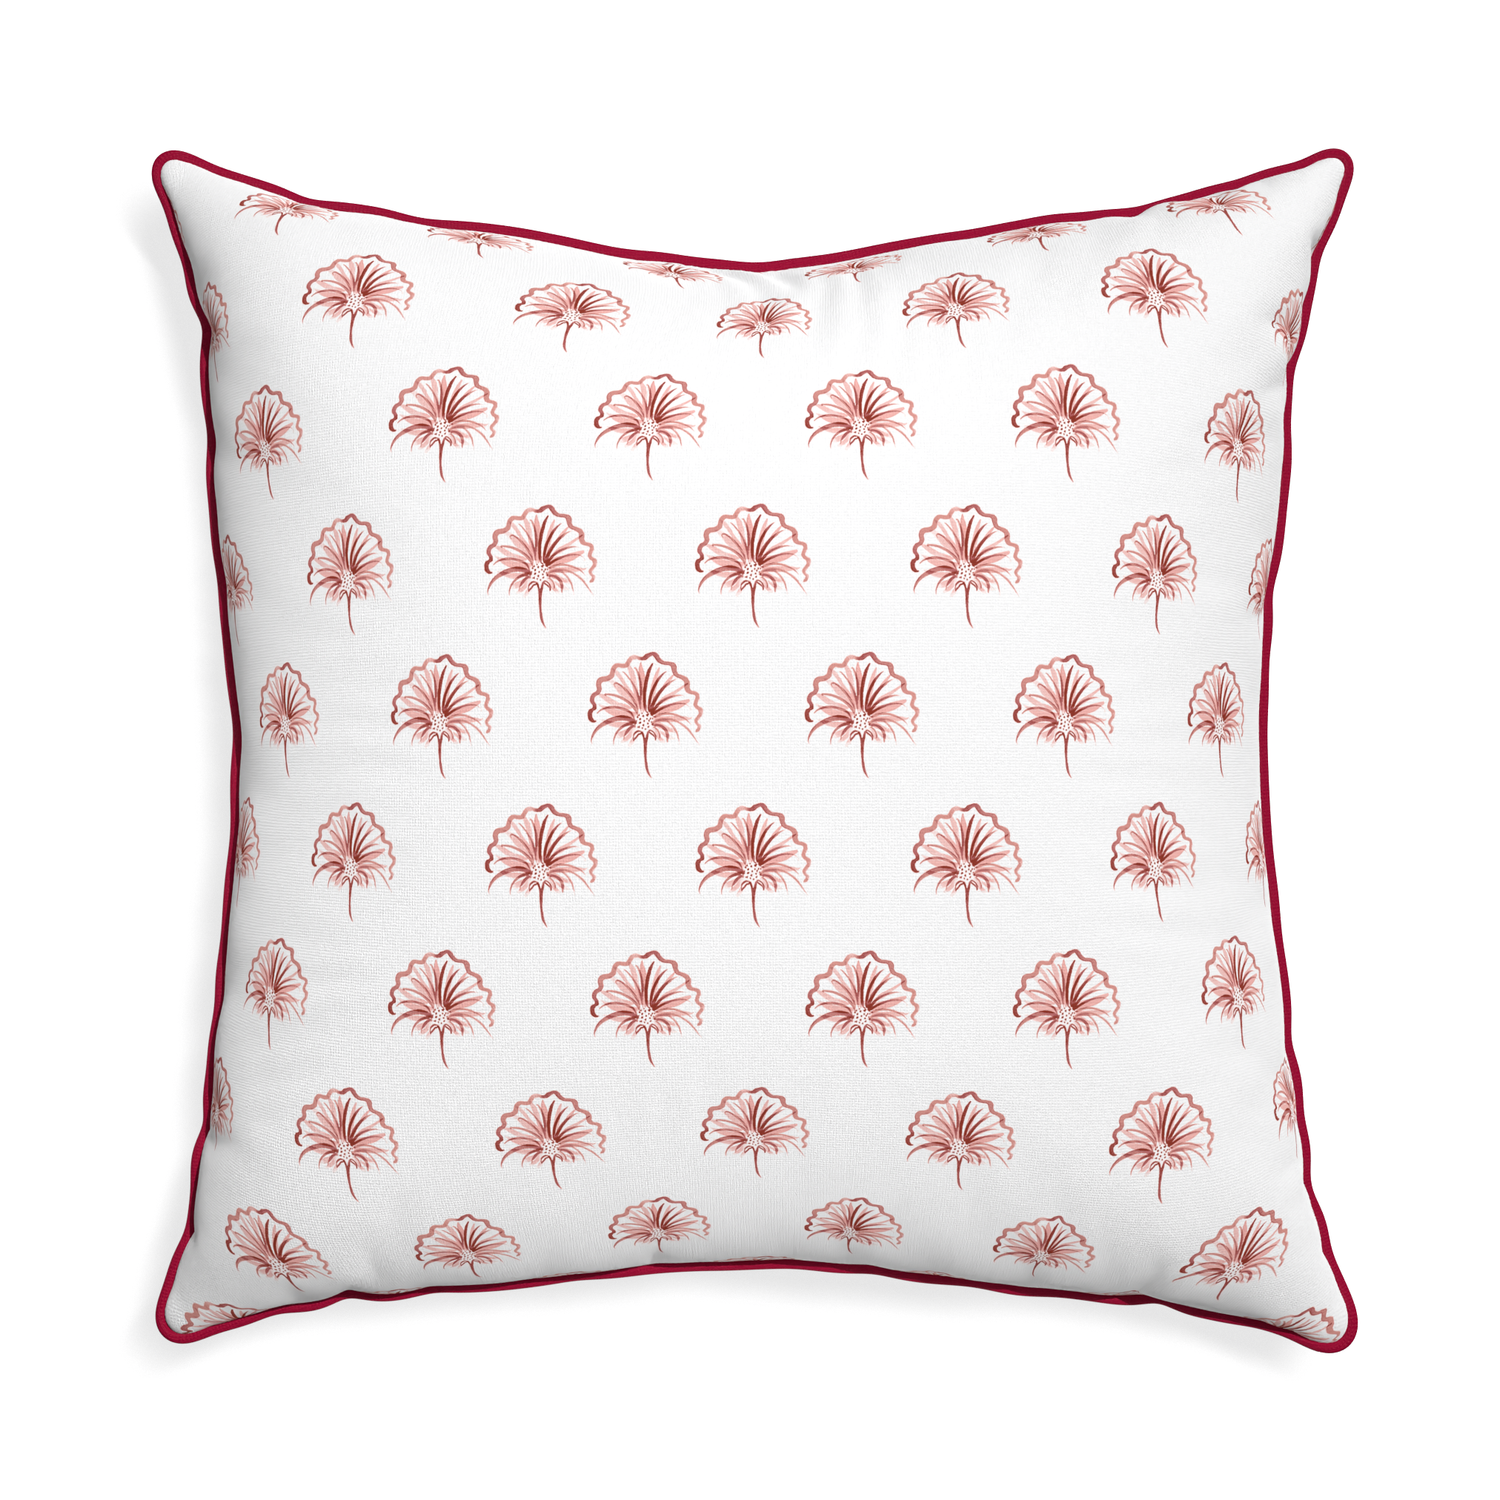 Euro-sham penelope rose custom pillow with raspberry piping on white background